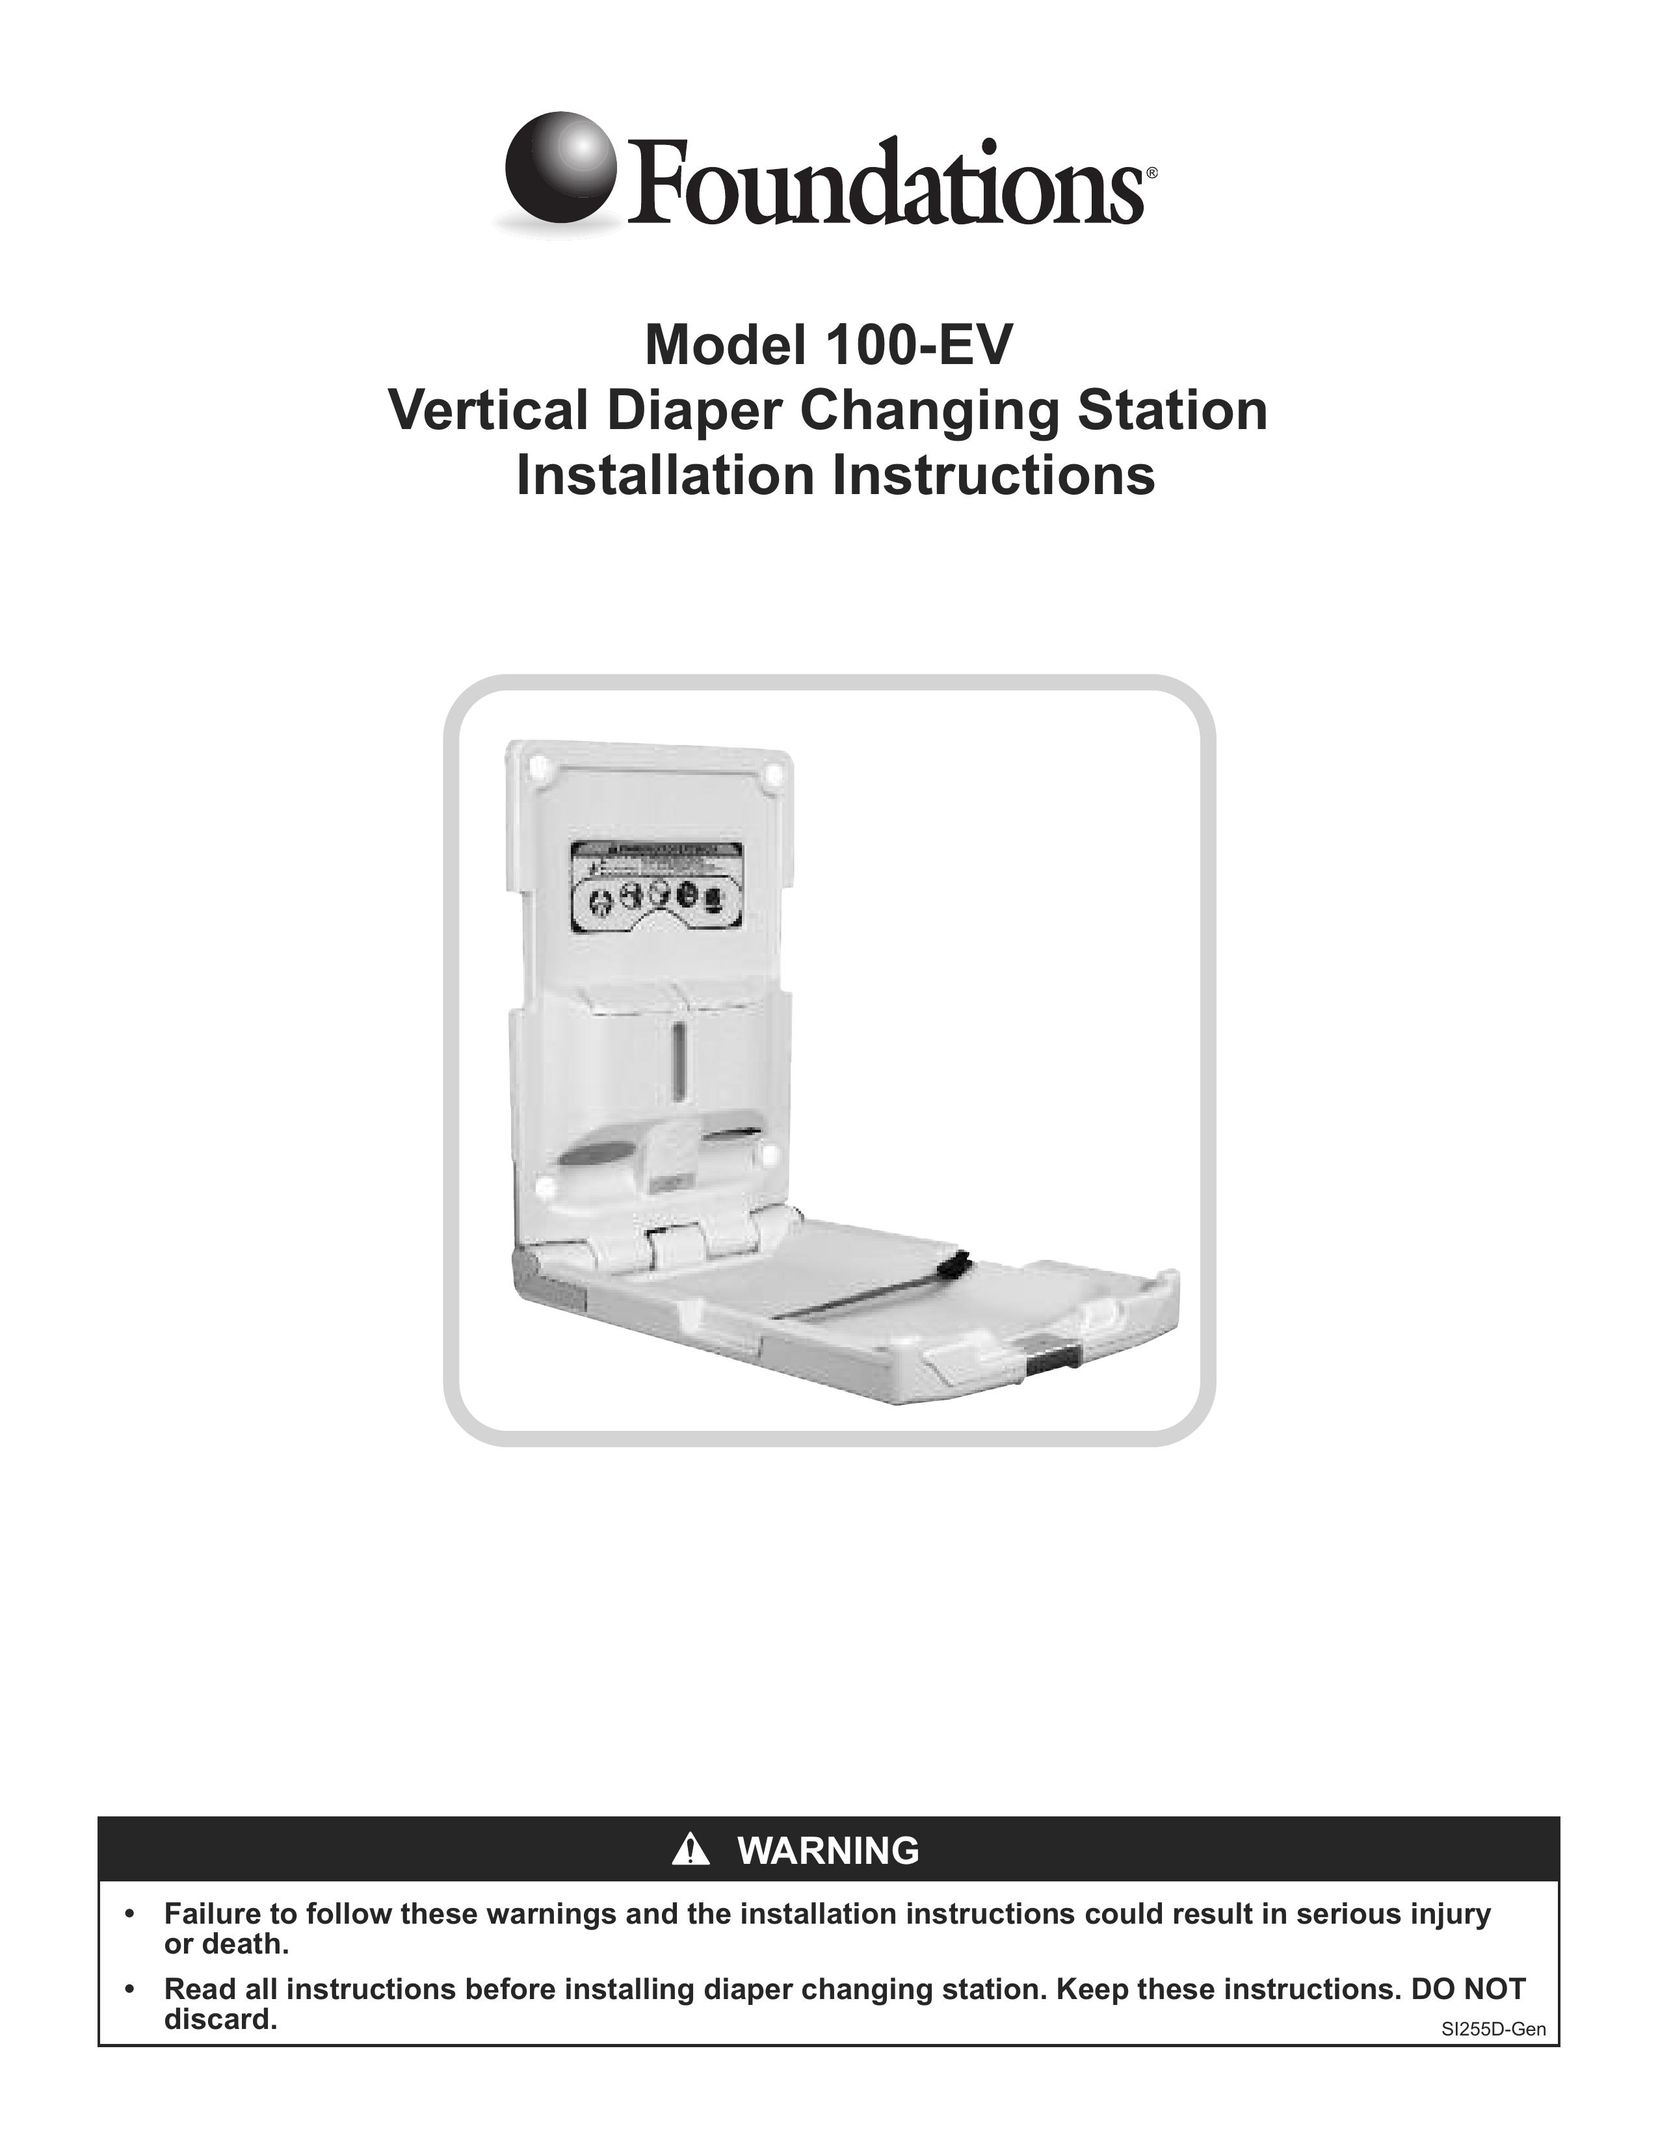 Foundations 100-EV Baby Furniture User Manual (Page 1)